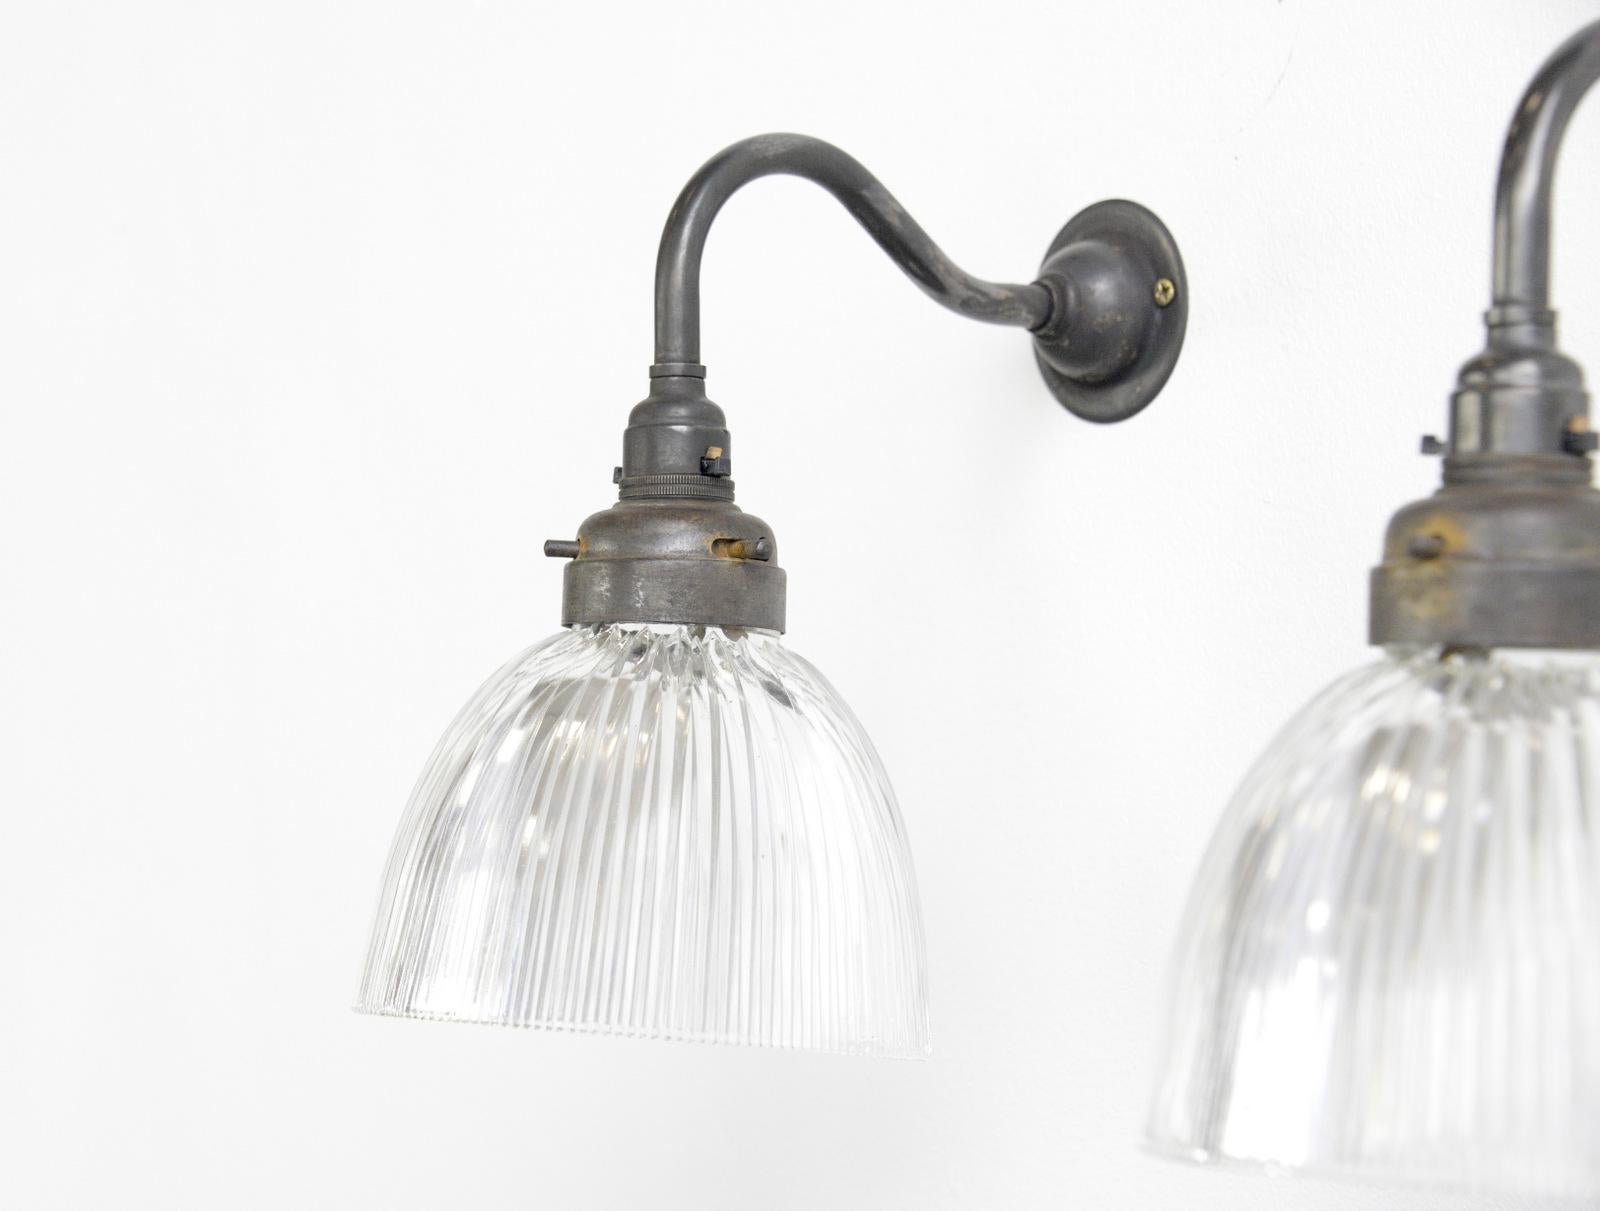 English Holophane wall lights, circa 1920s

- Price is for the pair
- Prismatic glass shades marked 